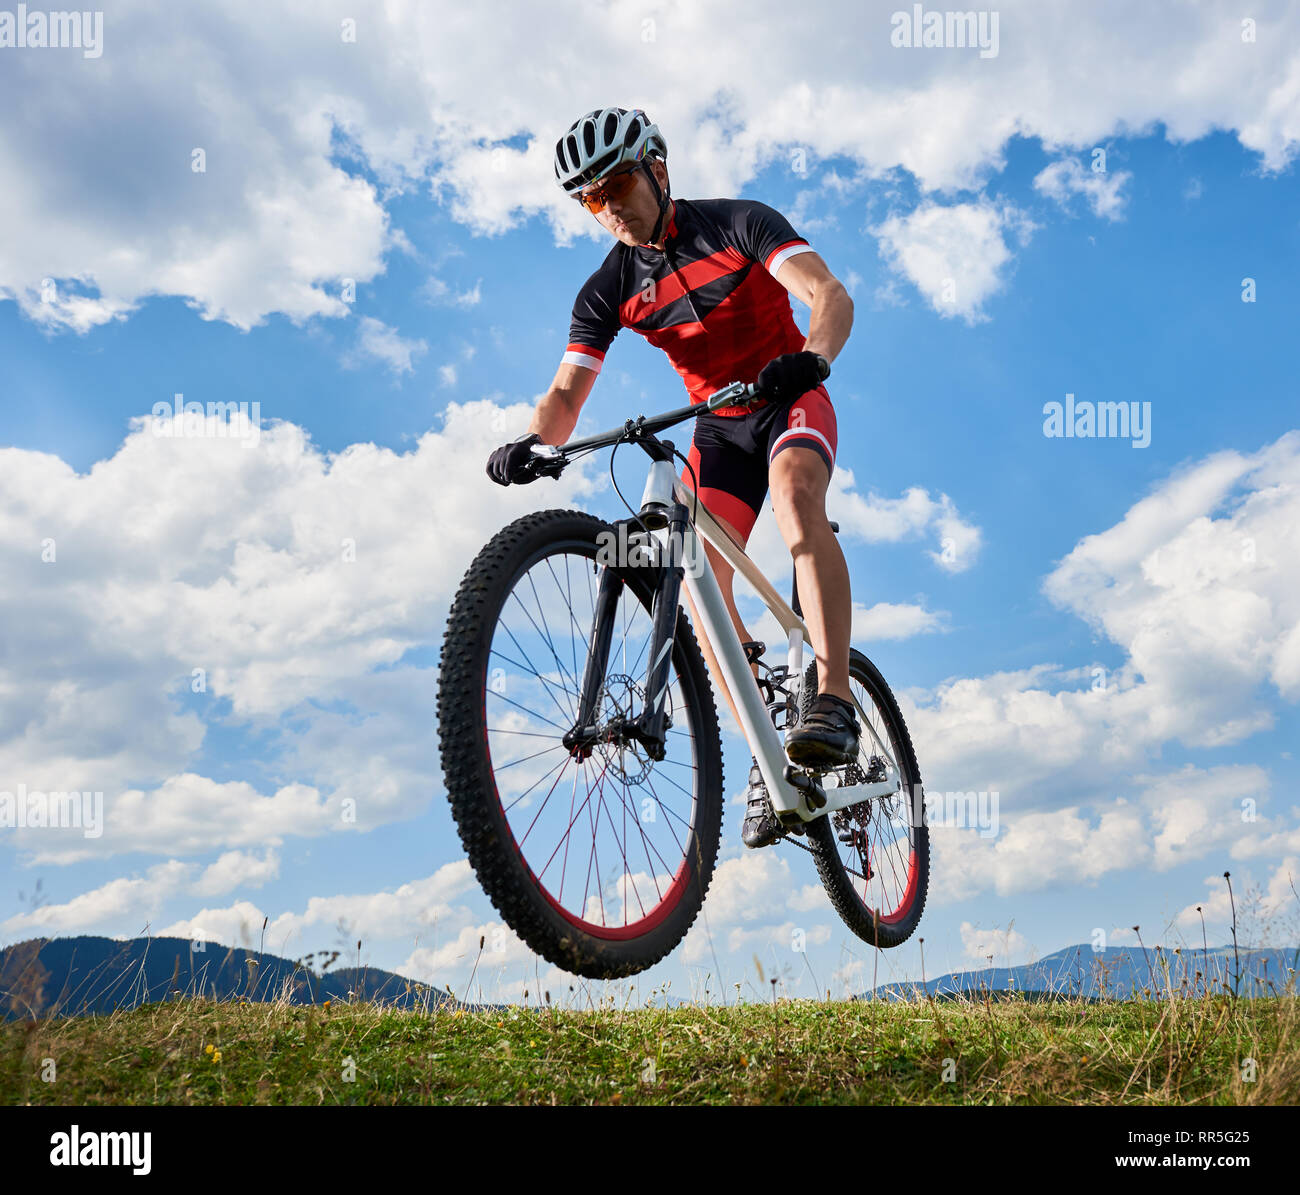 Young athletic sportsman biker in professional sportswear flying in air on his bike on bright blue sky with white clouds and distant hills background Active lifestyle and extreme sport concept. Stock Photo